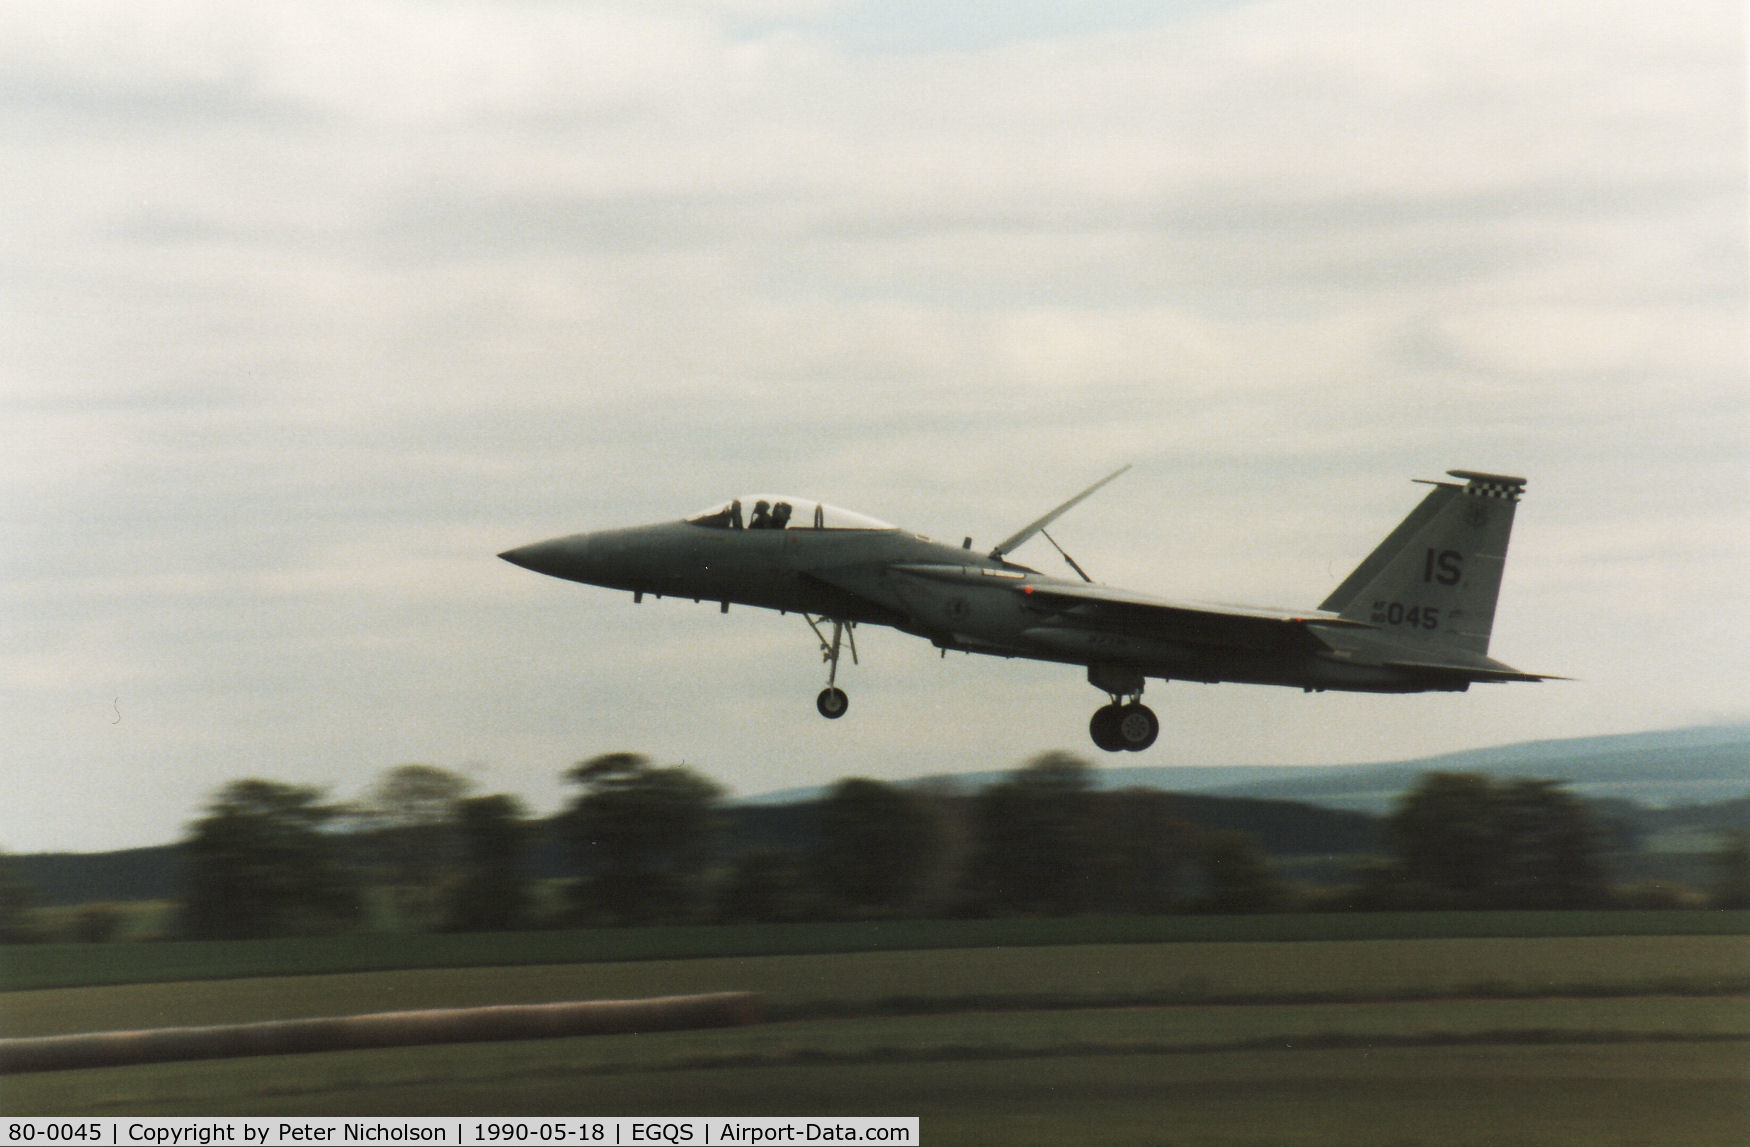 80-0045, 1980 McDonnell Douglas F-15C Eagle C/N 0715/C194, F-15C Eagle of 57th Fighter Interceptor Squadron landing at RAF Lossiemouth in May 1990.